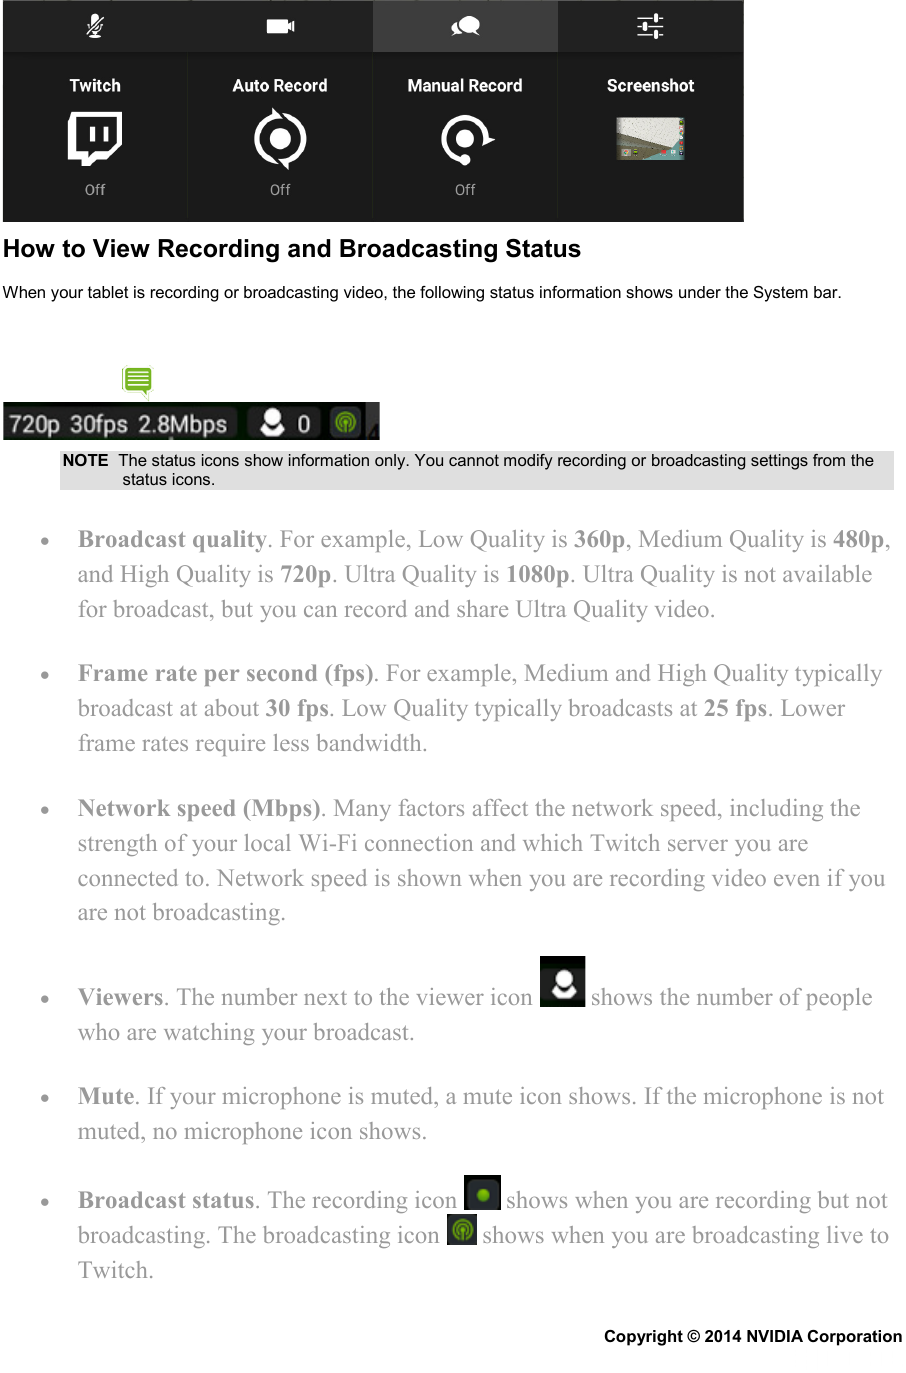  How to View Recording and Broadcasting Status When your tablet is recording or broadcasting video, the following status information shows under the System bar.  NOTE  The status icons show information only. You cannot modify recording or broadcasting settings from the status icons. • Broadcast quality. For example, Low Quality is 360p, Medium Quality is 480p, and High Quality is 720p. Ultra Quality is 1080p. Ultra Quality is not available for broadcast, but you can record and share Ultra Quality video. • Frame rate per second (fps). For example, Medium and High Quality typically broadcast at about 30 fps. Low Quality typically broadcasts at 25 fps. Lower frame rates require less bandwidth. • Network speed (Mbps). Many factors affect the network speed, including the strength of your local Wi-Fi connection and which Twitch server you are connected to. Network speed is shown when you are recording video even if you are not broadcasting. • Viewers. The number next to the viewer icon   shows the number of people who are watching your broadcast. • Mute. If your microphone is muted, a mute icon shows. If the microphone is not muted, no microphone icon shows. • Broadcast status. The recording icon   shows when you are recording but not broadcasting. The broadcasting icon   shows when you are broadcasting live to Twitch. Copyright © 2014 NVIDIA Corporation   